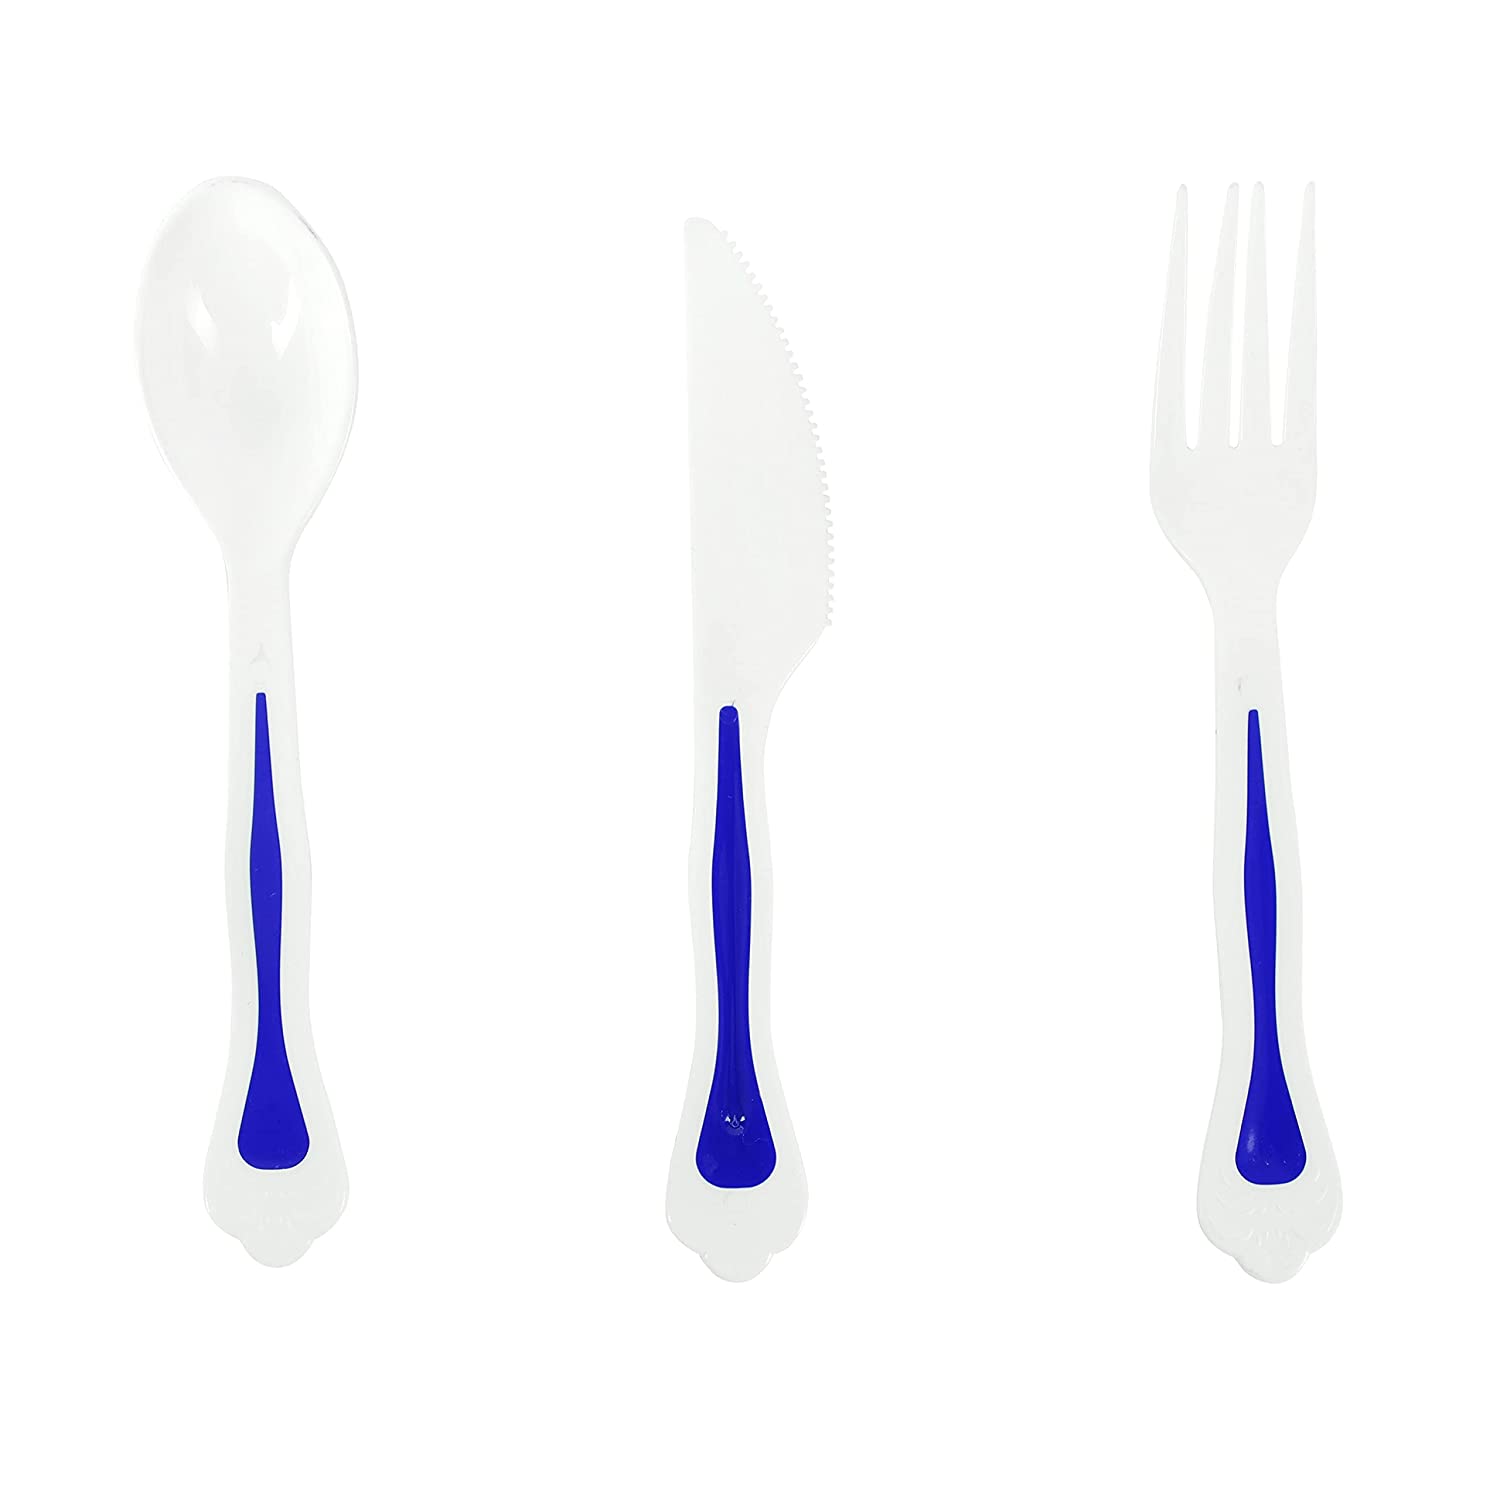 Cutting EDGE Double Color Dinner with Big Plates,Small Plates, Big Bowls,Small Bowls, Spoons,Fork and Knife